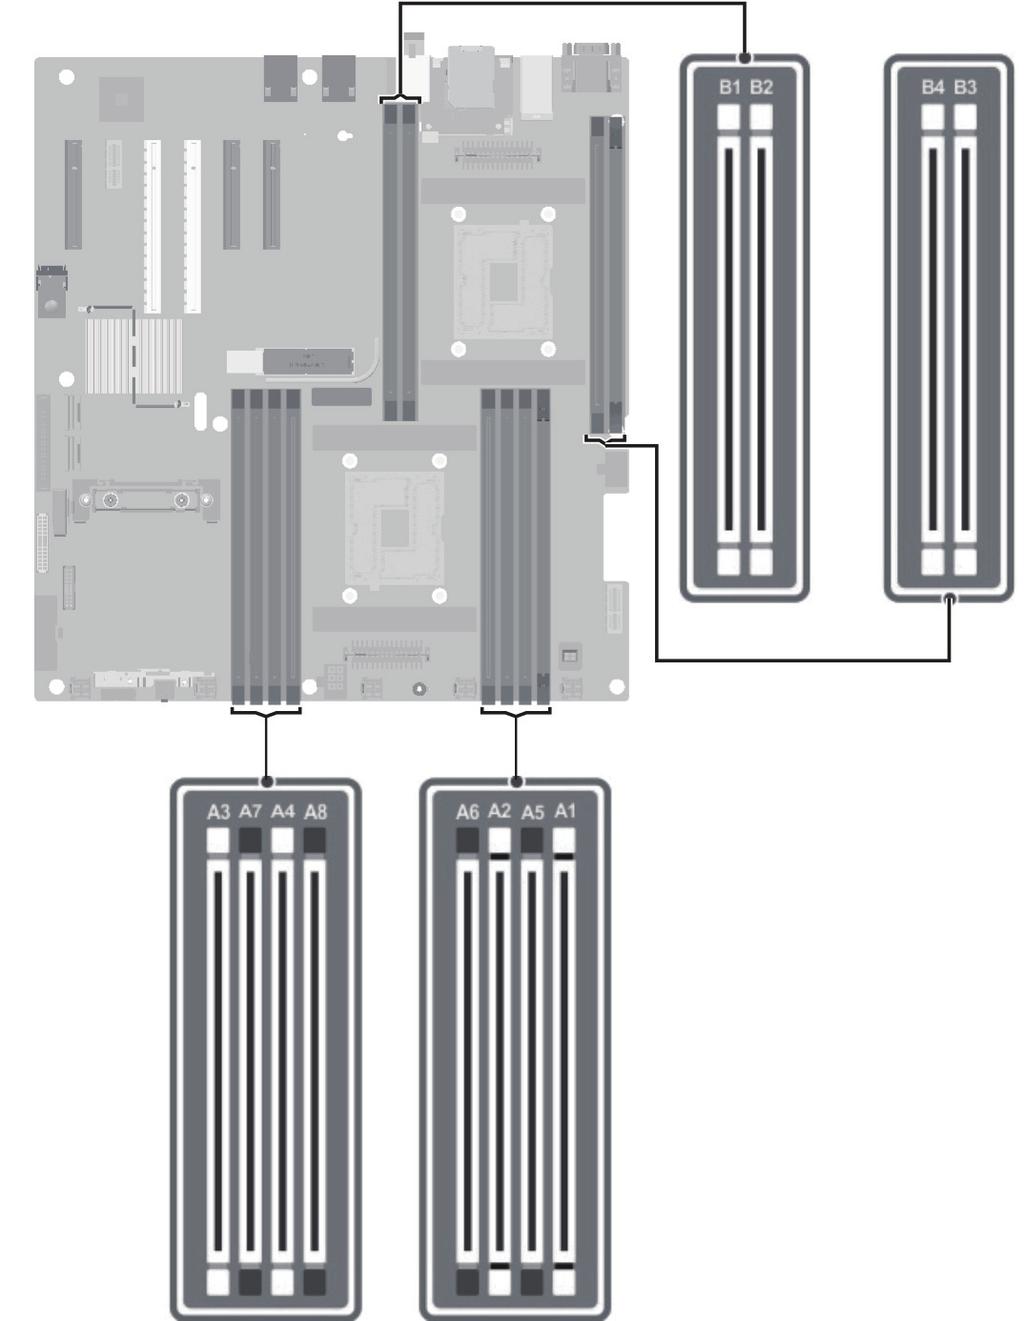 Memory channels are organized as follows: Processor 1 Processor 2 channel 0: memory sockets A1 and A5 channel 1: memory sockets A2 and A6 channel 2: memory sockets A3 and A7 channel 3: memory sockets